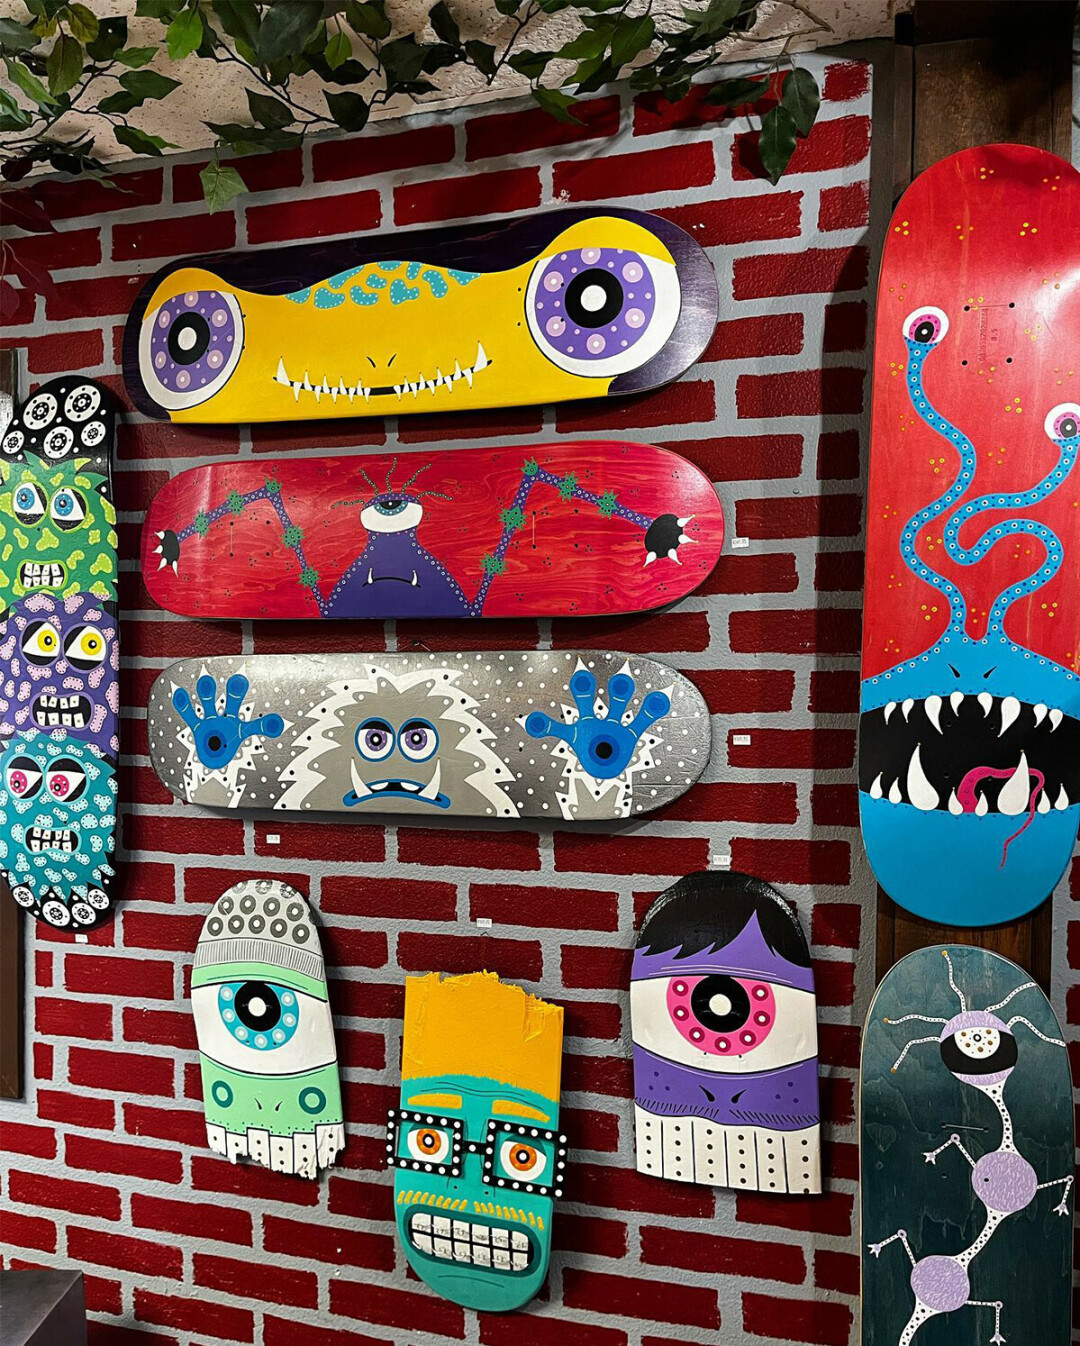 Art deck examples at Passion Board Shop. (via their Facebook)